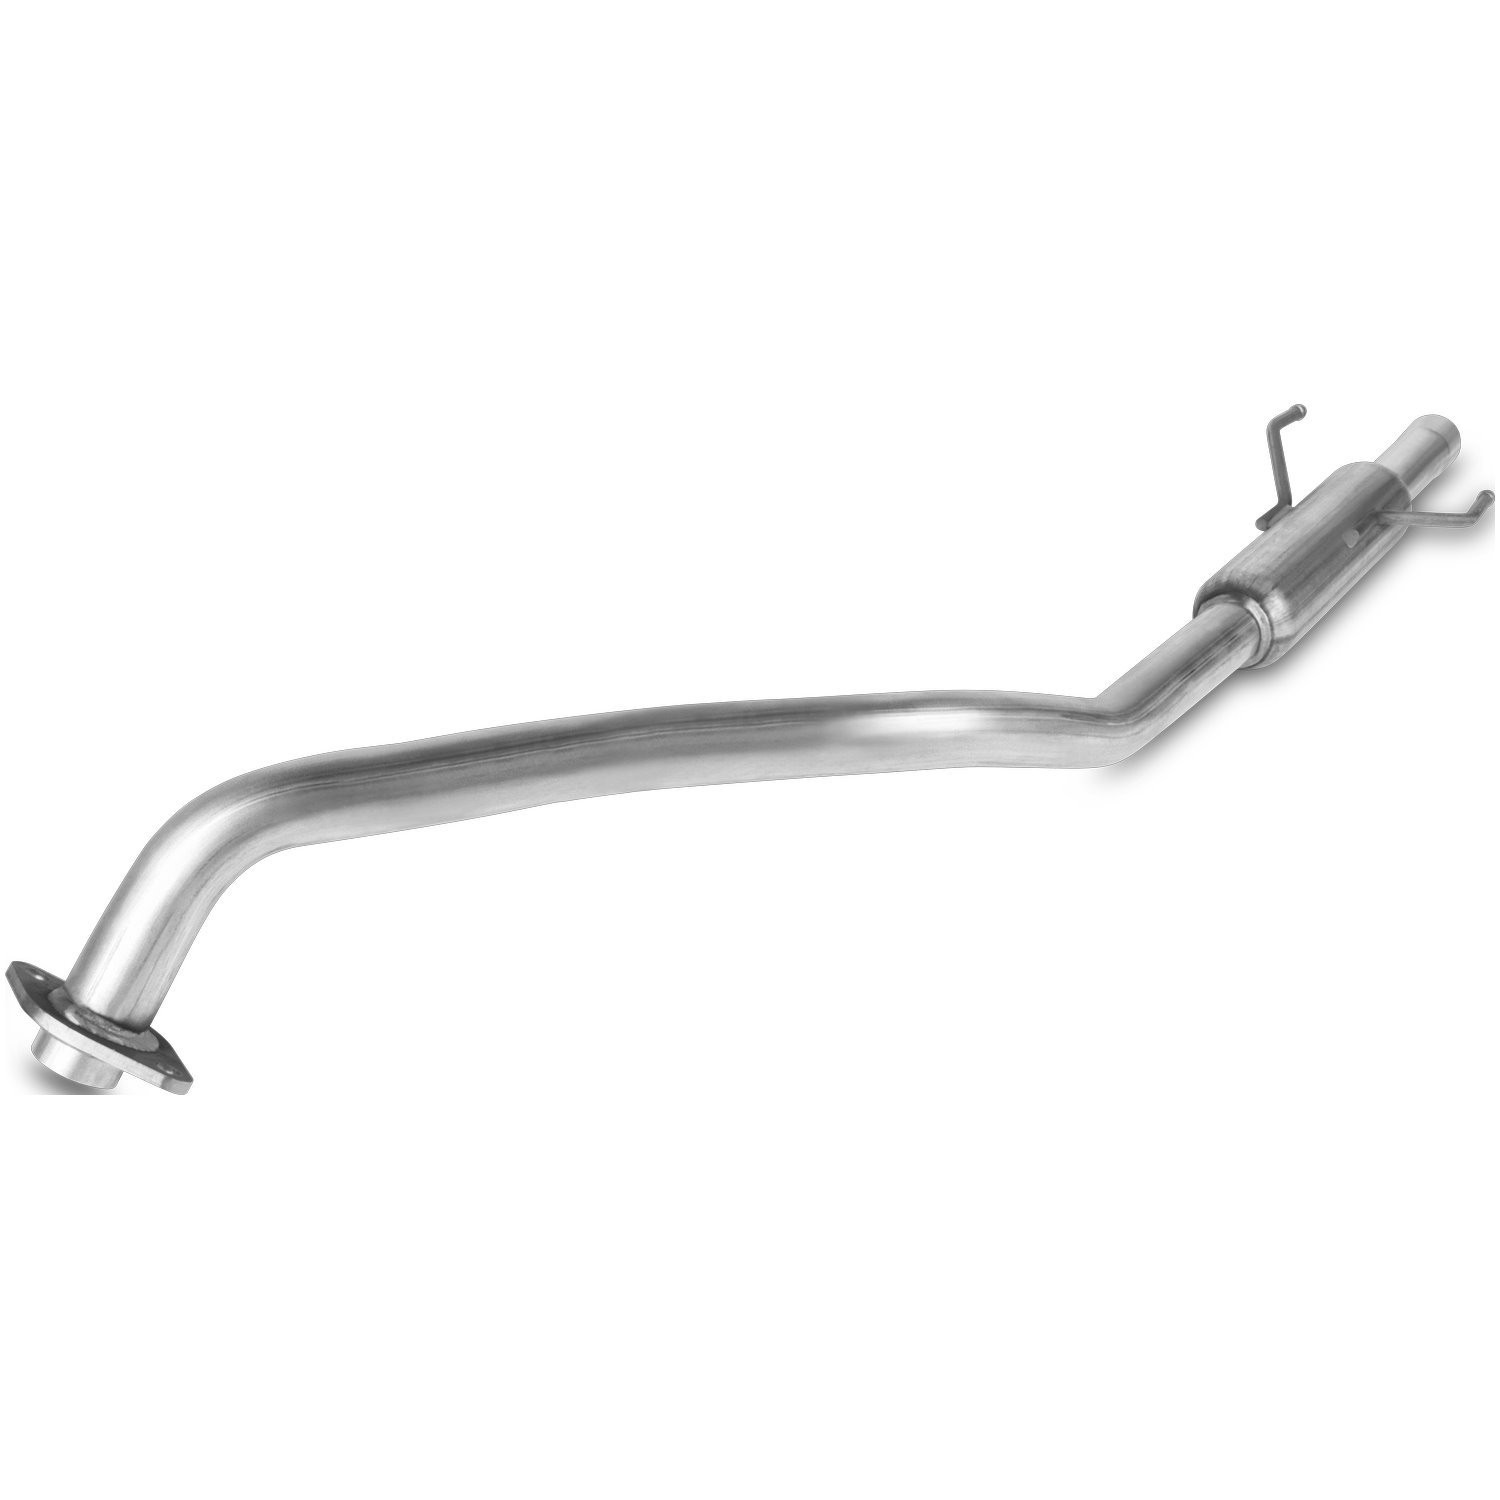 Direct-Fit Exhaust Resonator and Pipe Assembly, 2005-2008 Toyota Corolla/Matrix, Pontiac Vibe 1.8L